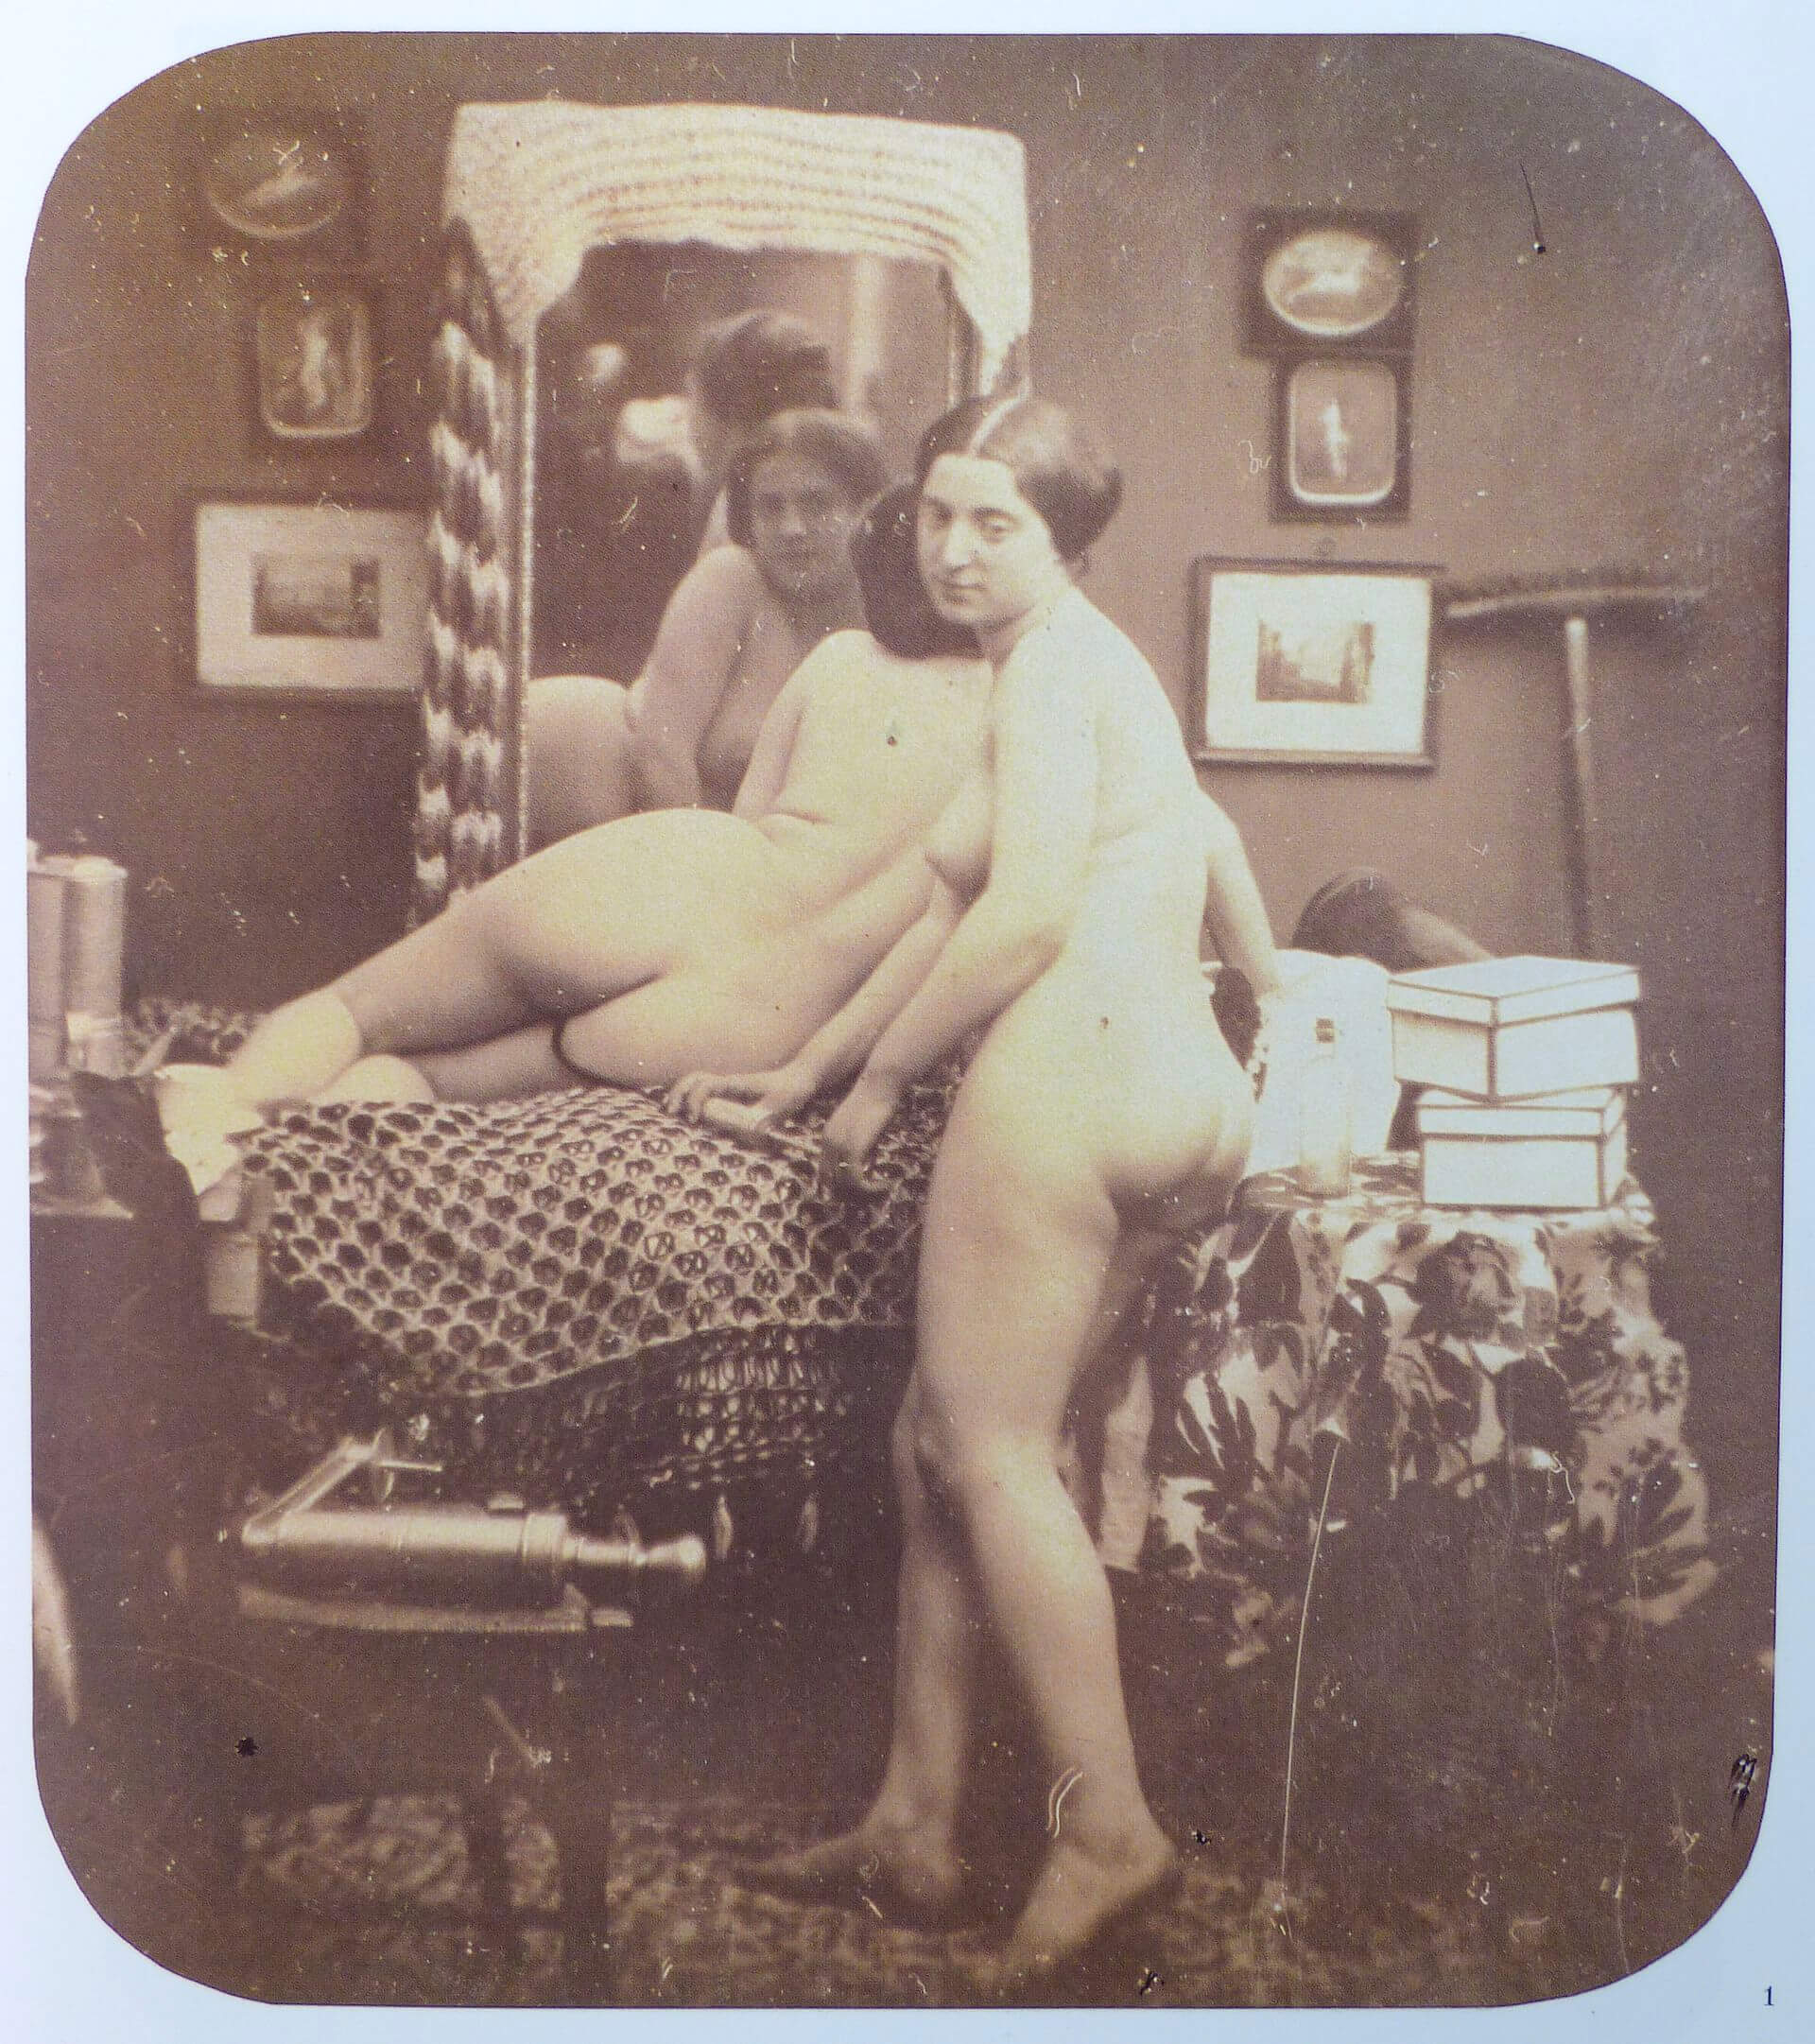 A stereoscopic daguerréotype depicting two nude women looking into a mirror<p>© Auguste Belloc</p>